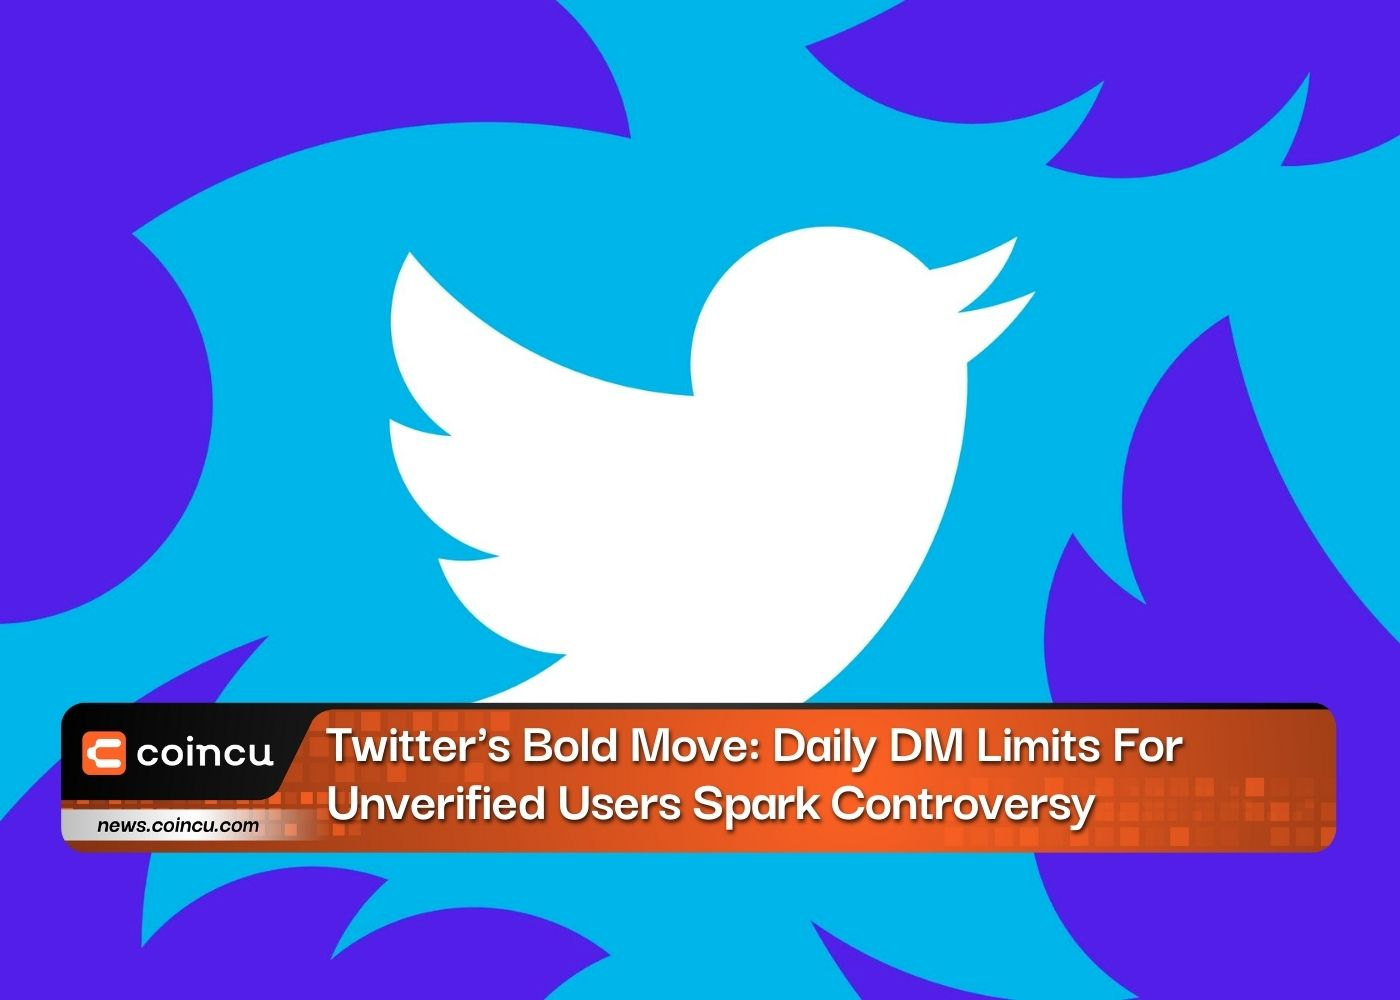 Twitter's Bold Move: Daily DM Limits For Unverified Users Spark Controversy